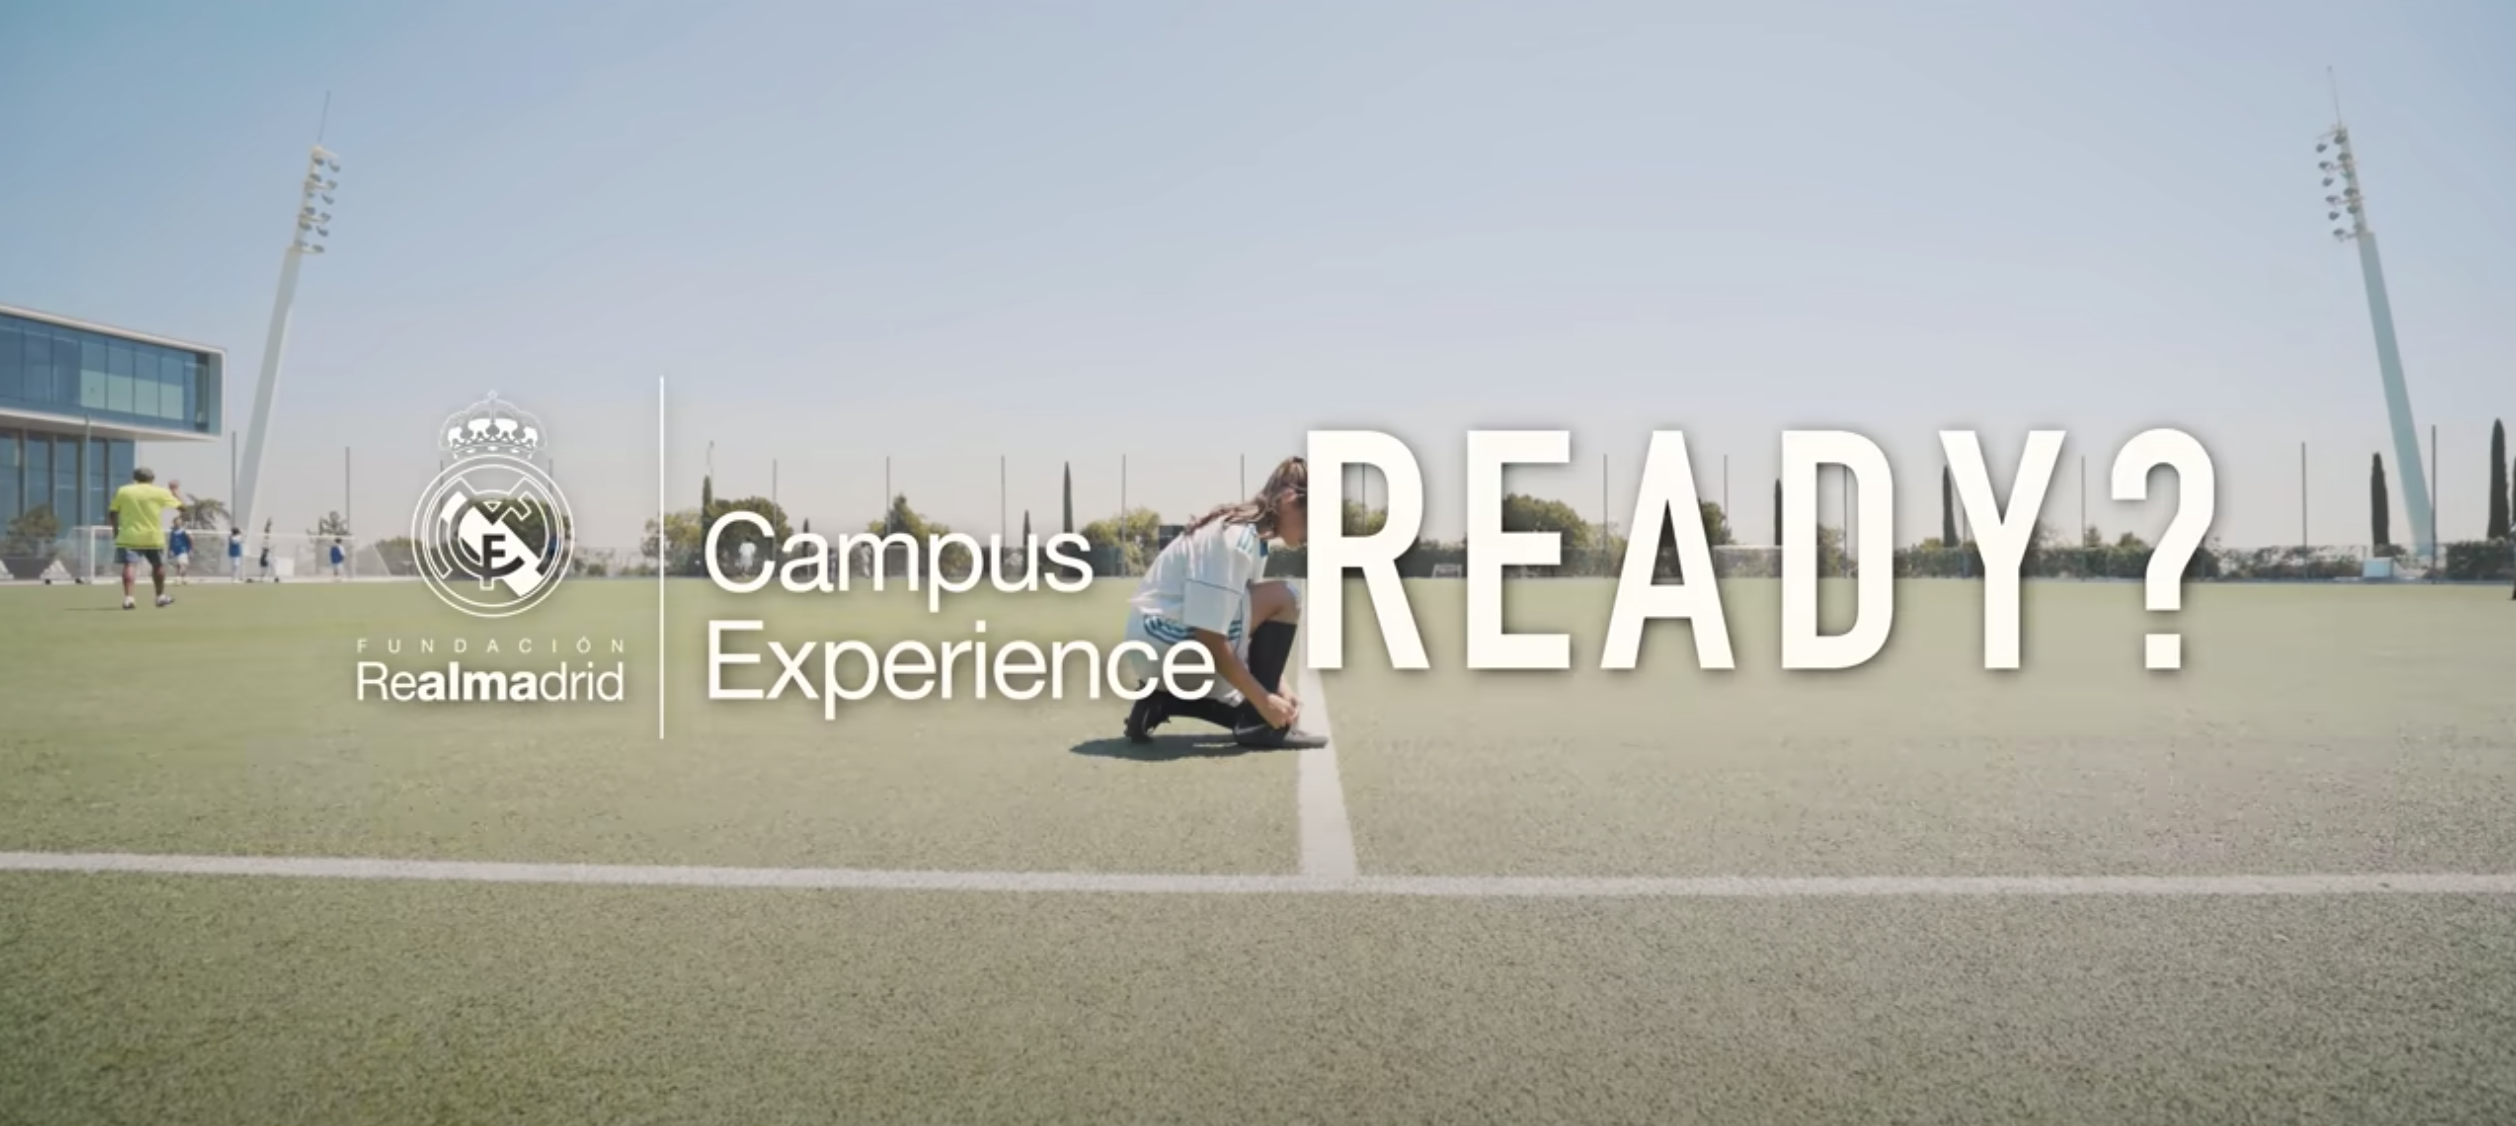 Campus Experience